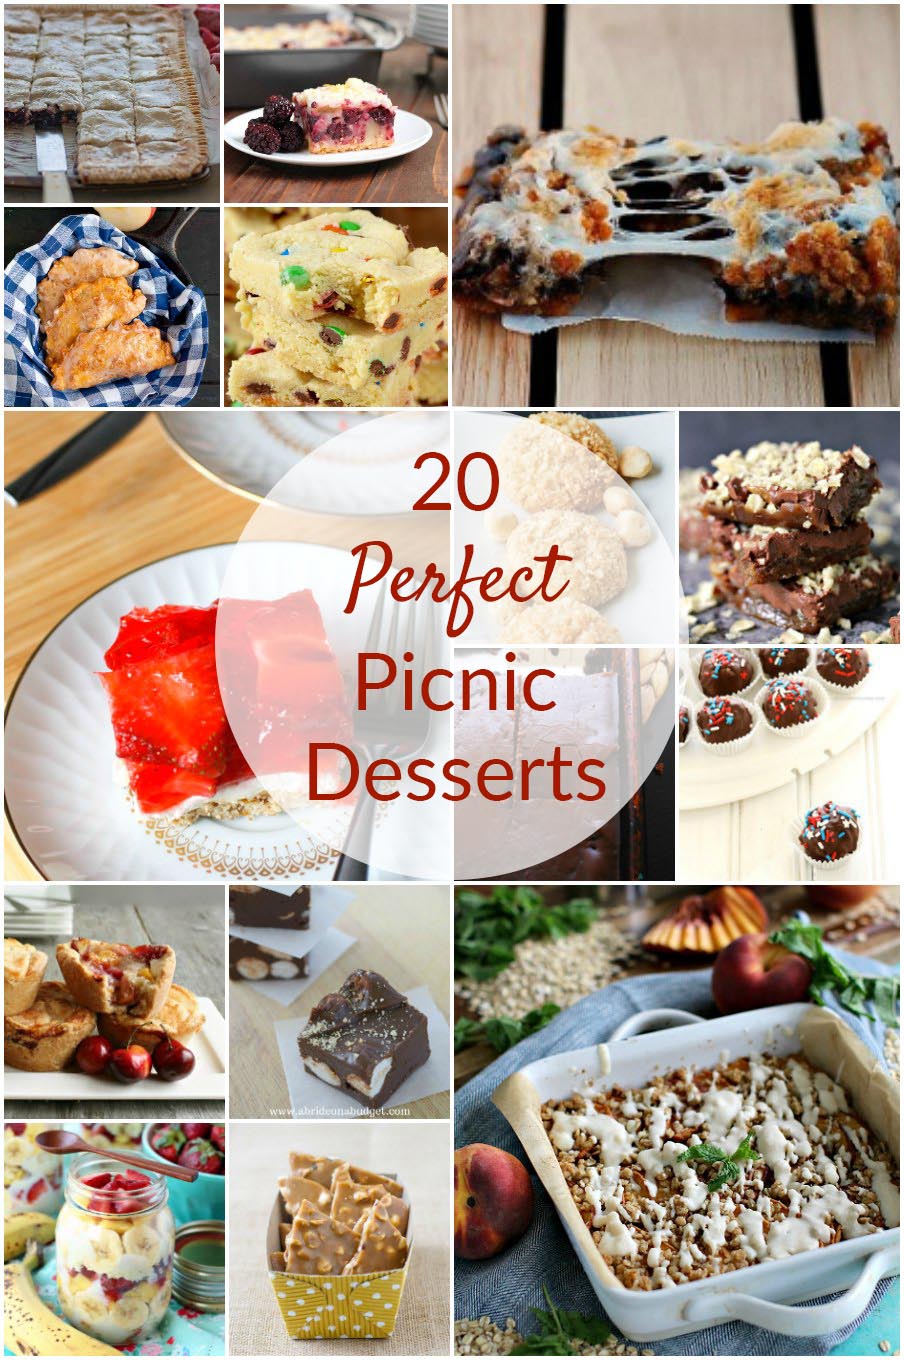 No picnic should be without dessert. Here are 20 delicious picnic desserts that will provide the perfect sweet end to your outdoor meal. 